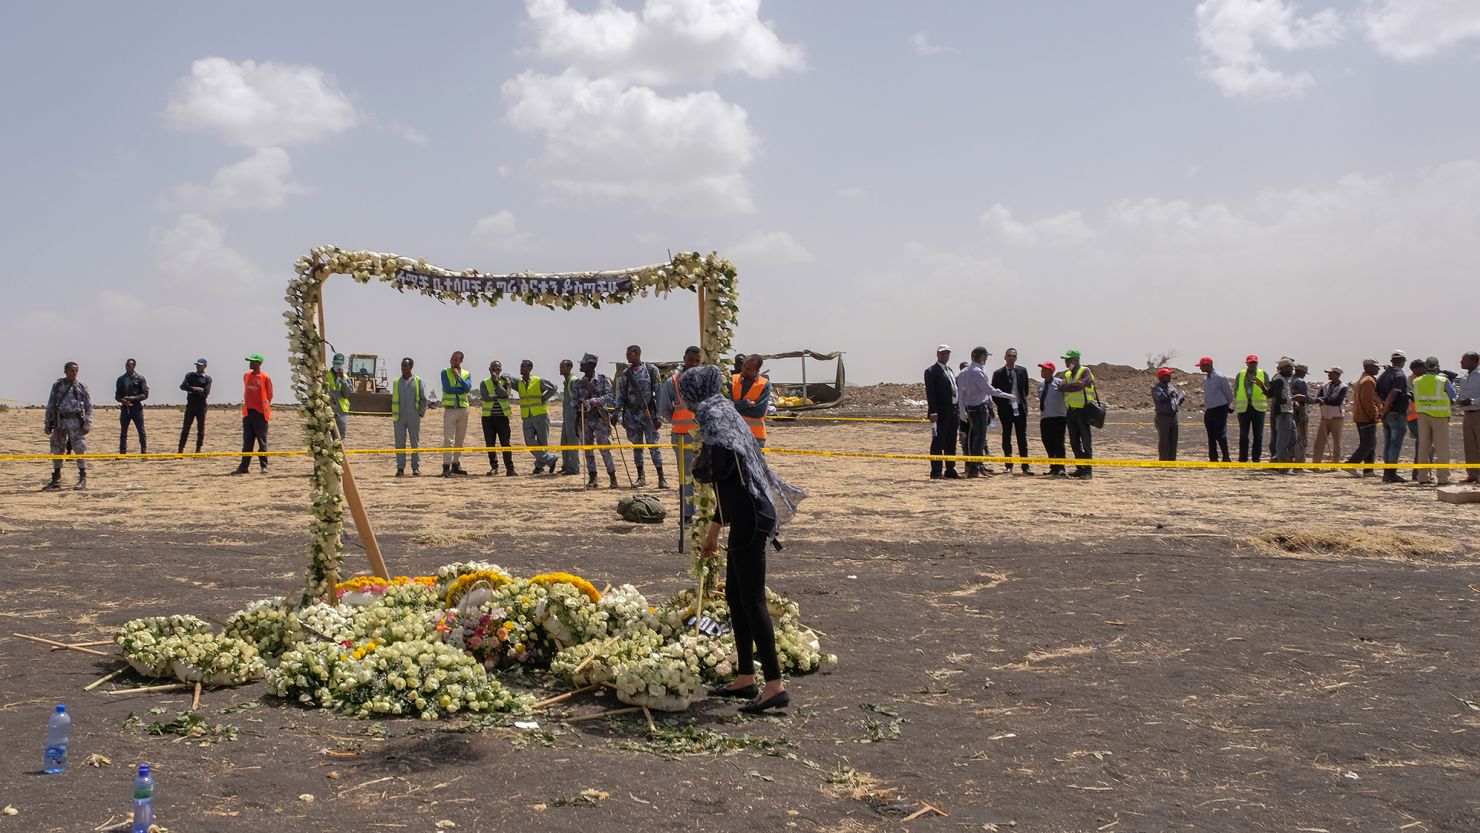 A mourner lays flowers at the Memorial Arch during a visit to the crash site of Ethiopian Airlines Flight ET302 on March 14, 2019 in Ejere, Ethiopia. 